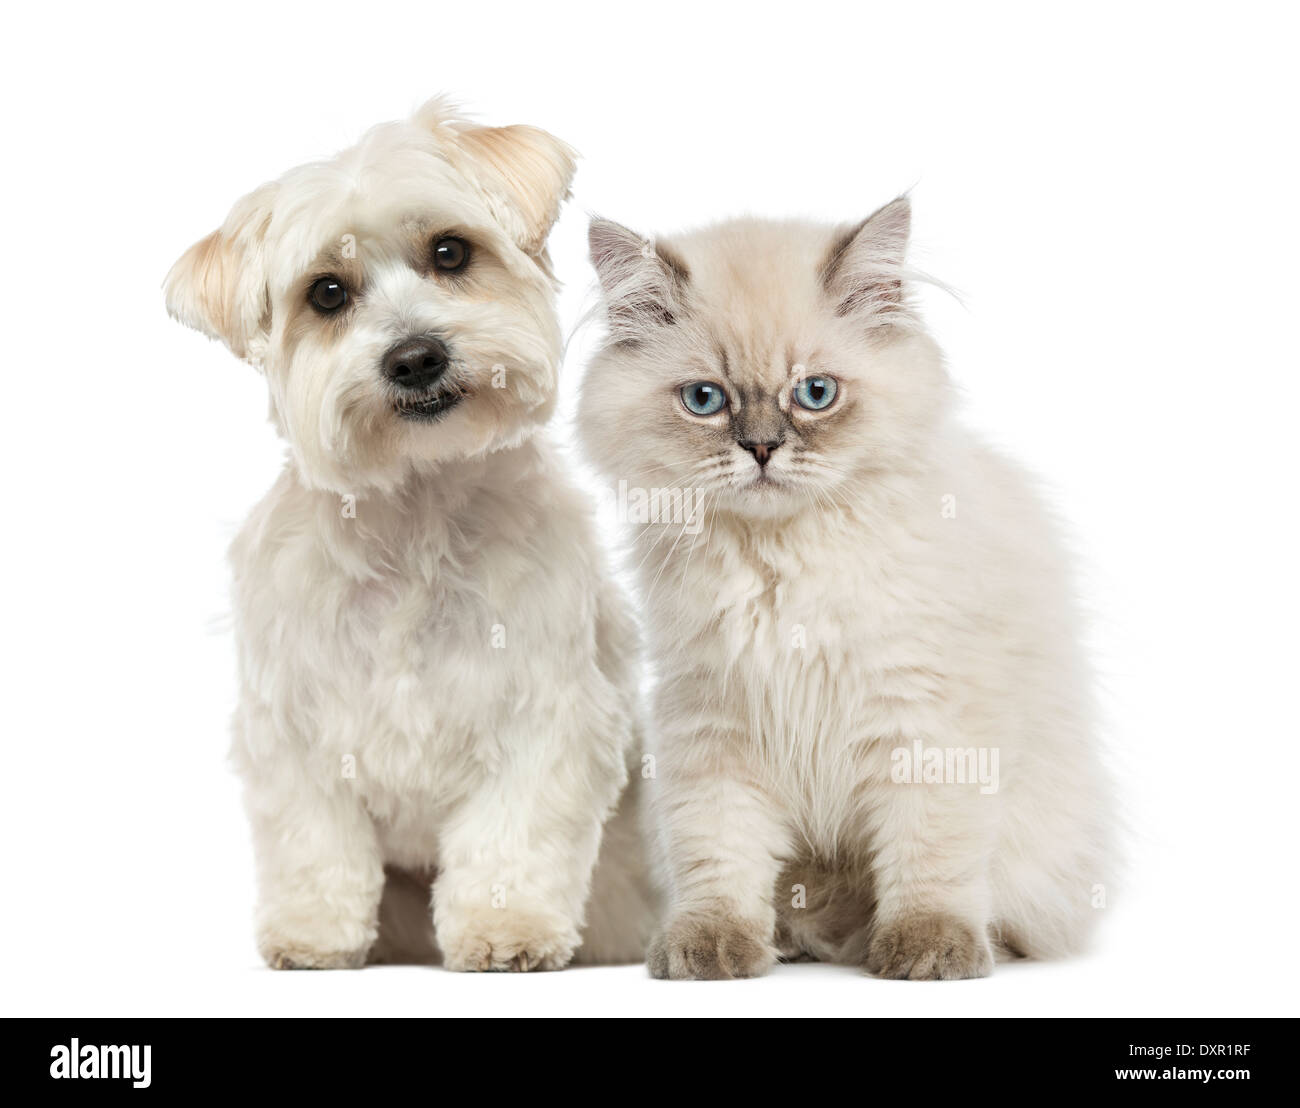 Kitten and dog sitting together and looking at the camera against white background Stock Photo